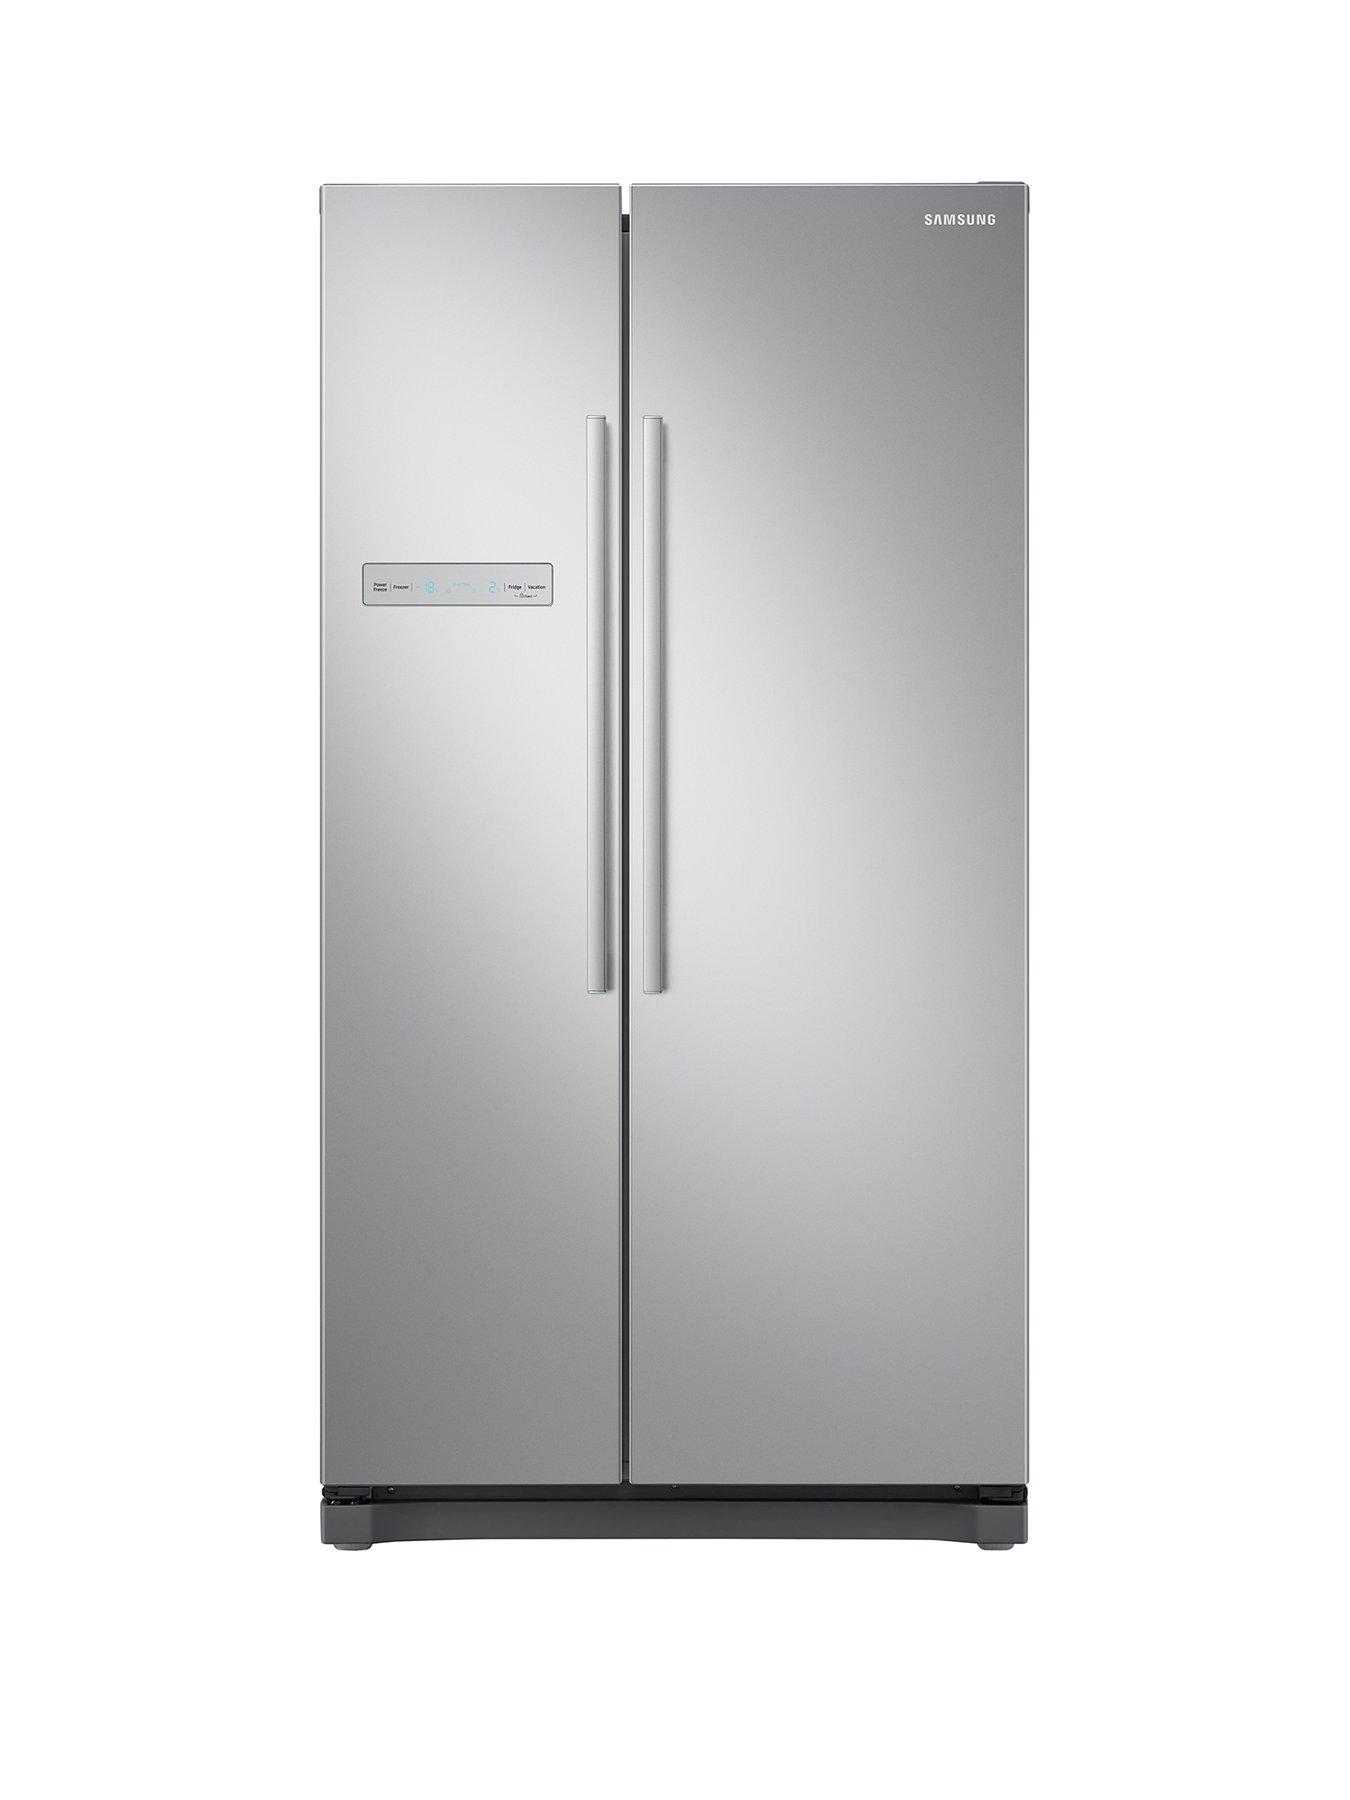 Samsung Rs54N3103Sa/Eu American Style Frost Free Fridge Freezer With All-Around Cooling And 5 Year Samsung Parts And Labour Warranty – Graphite